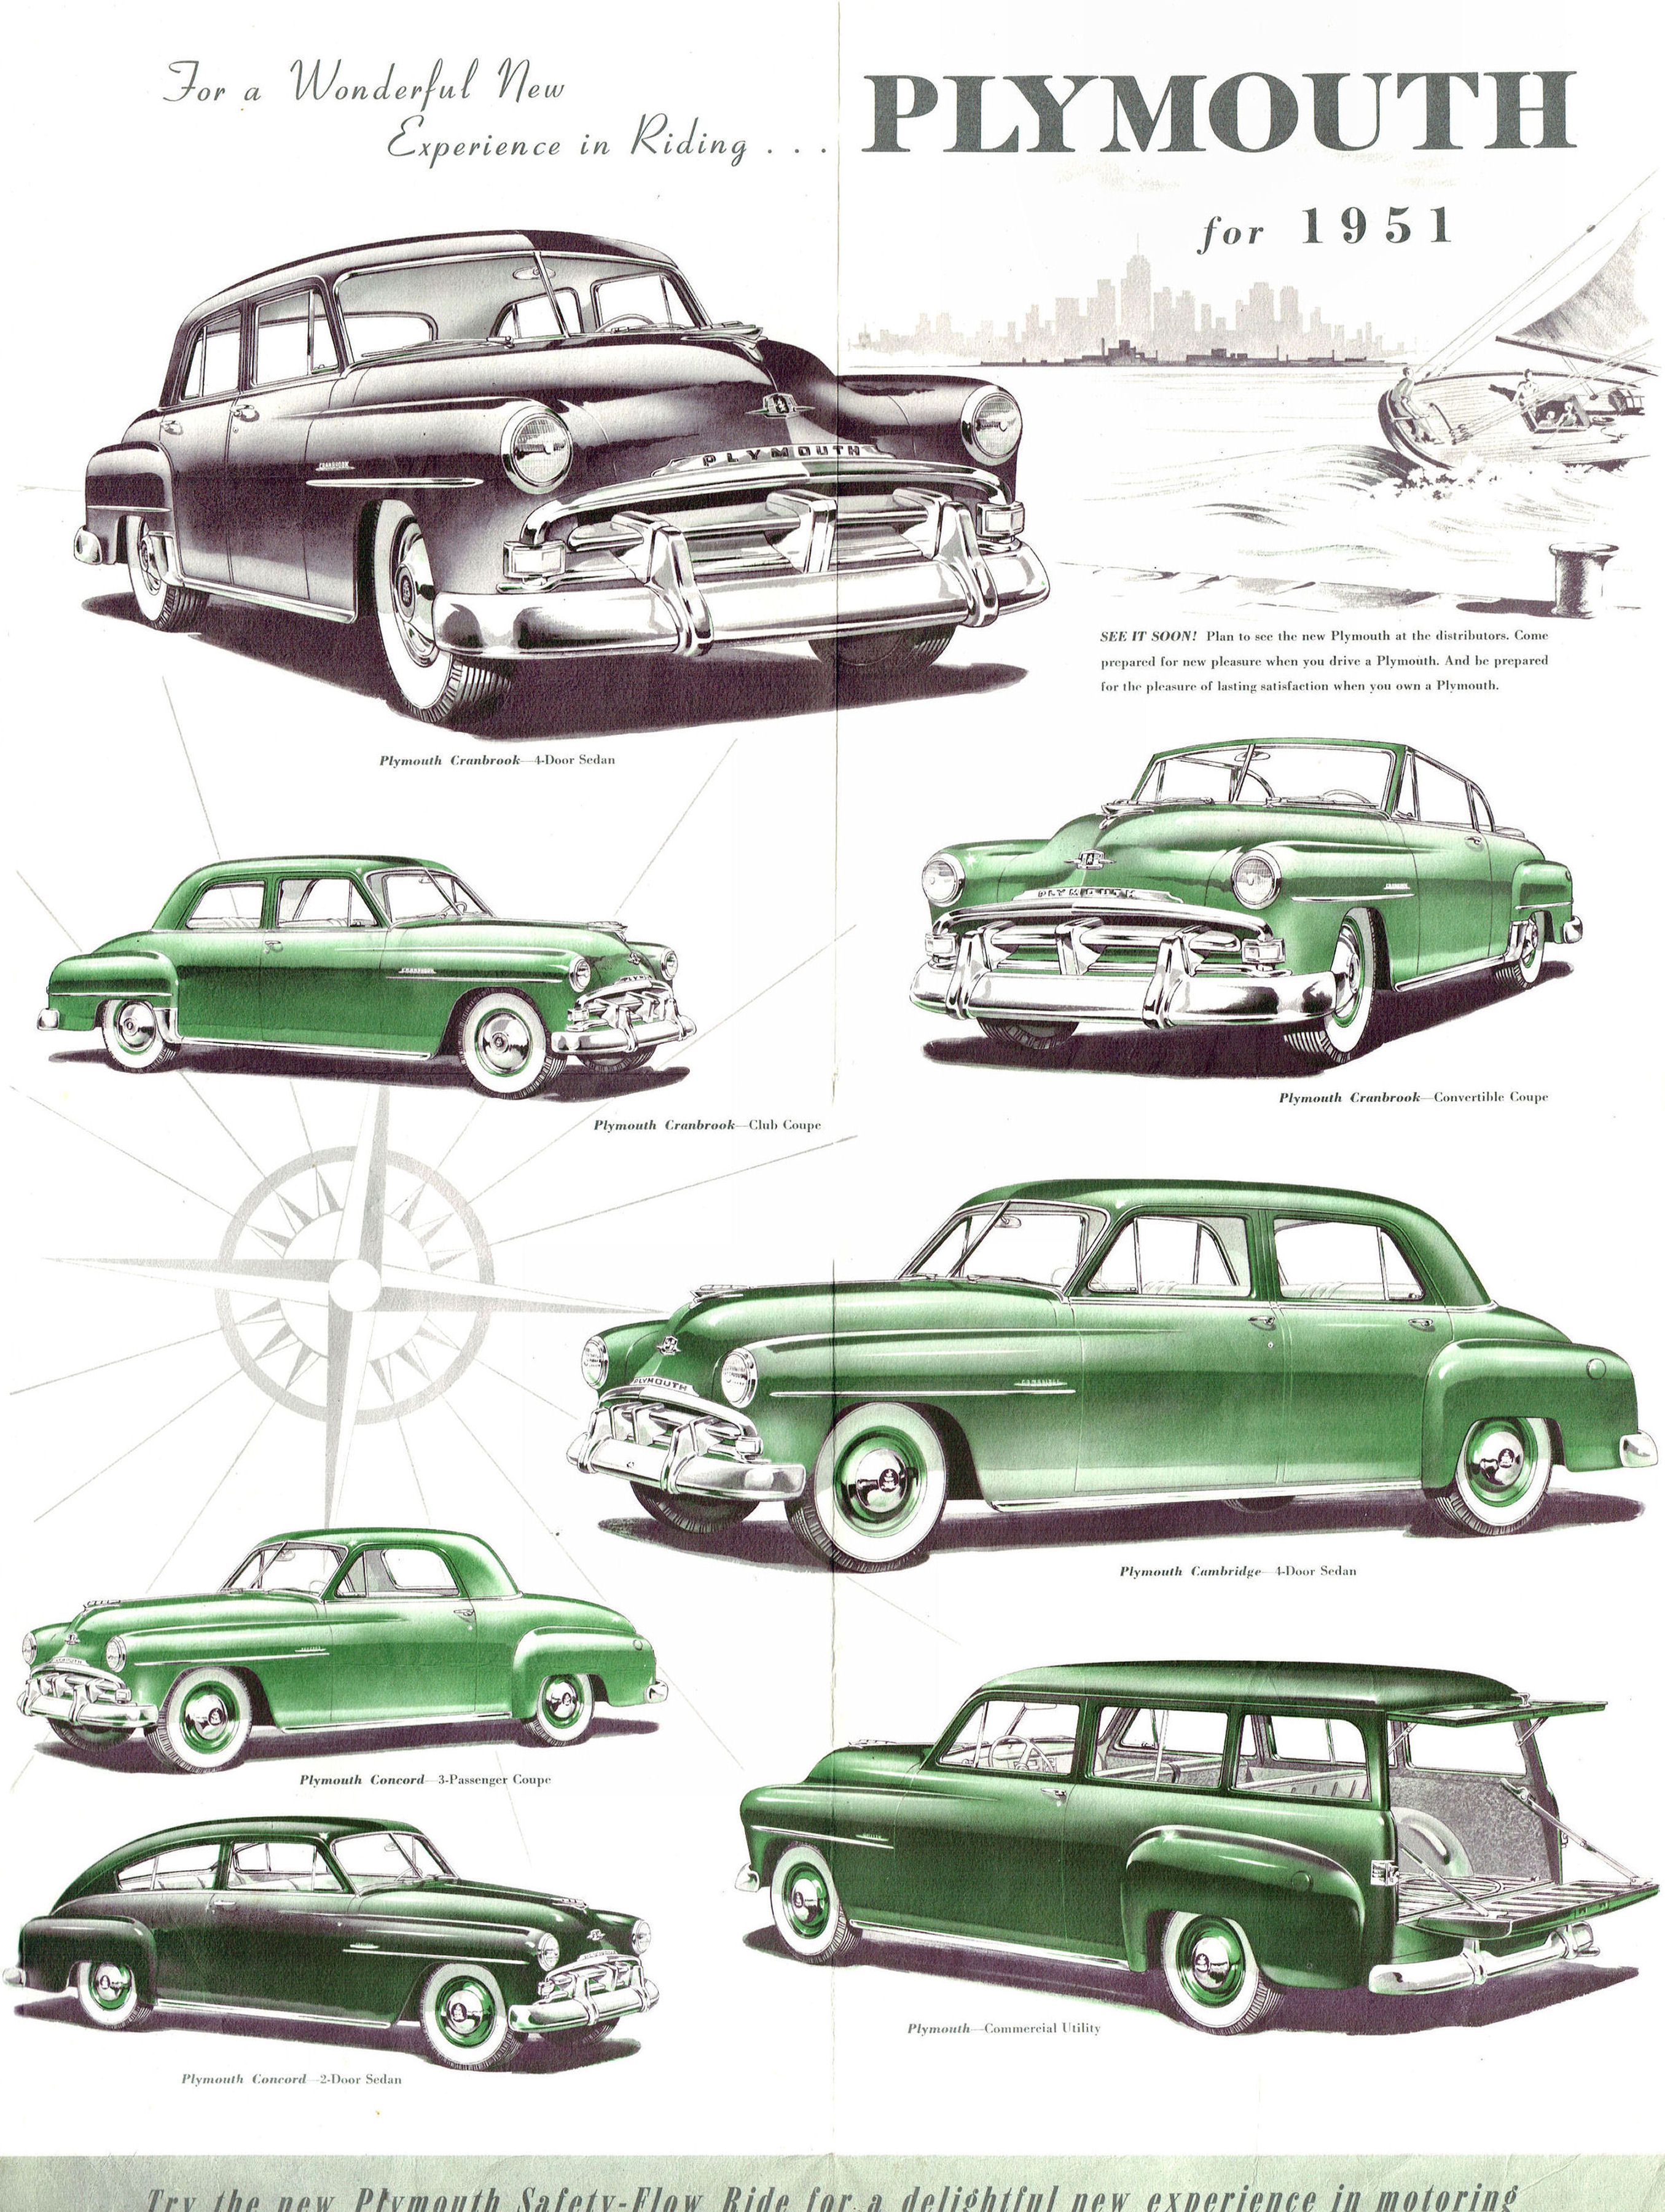 1951 Plymouth Export Foldout (TP).pdf-2023-12-3 20.12.16_Page_4